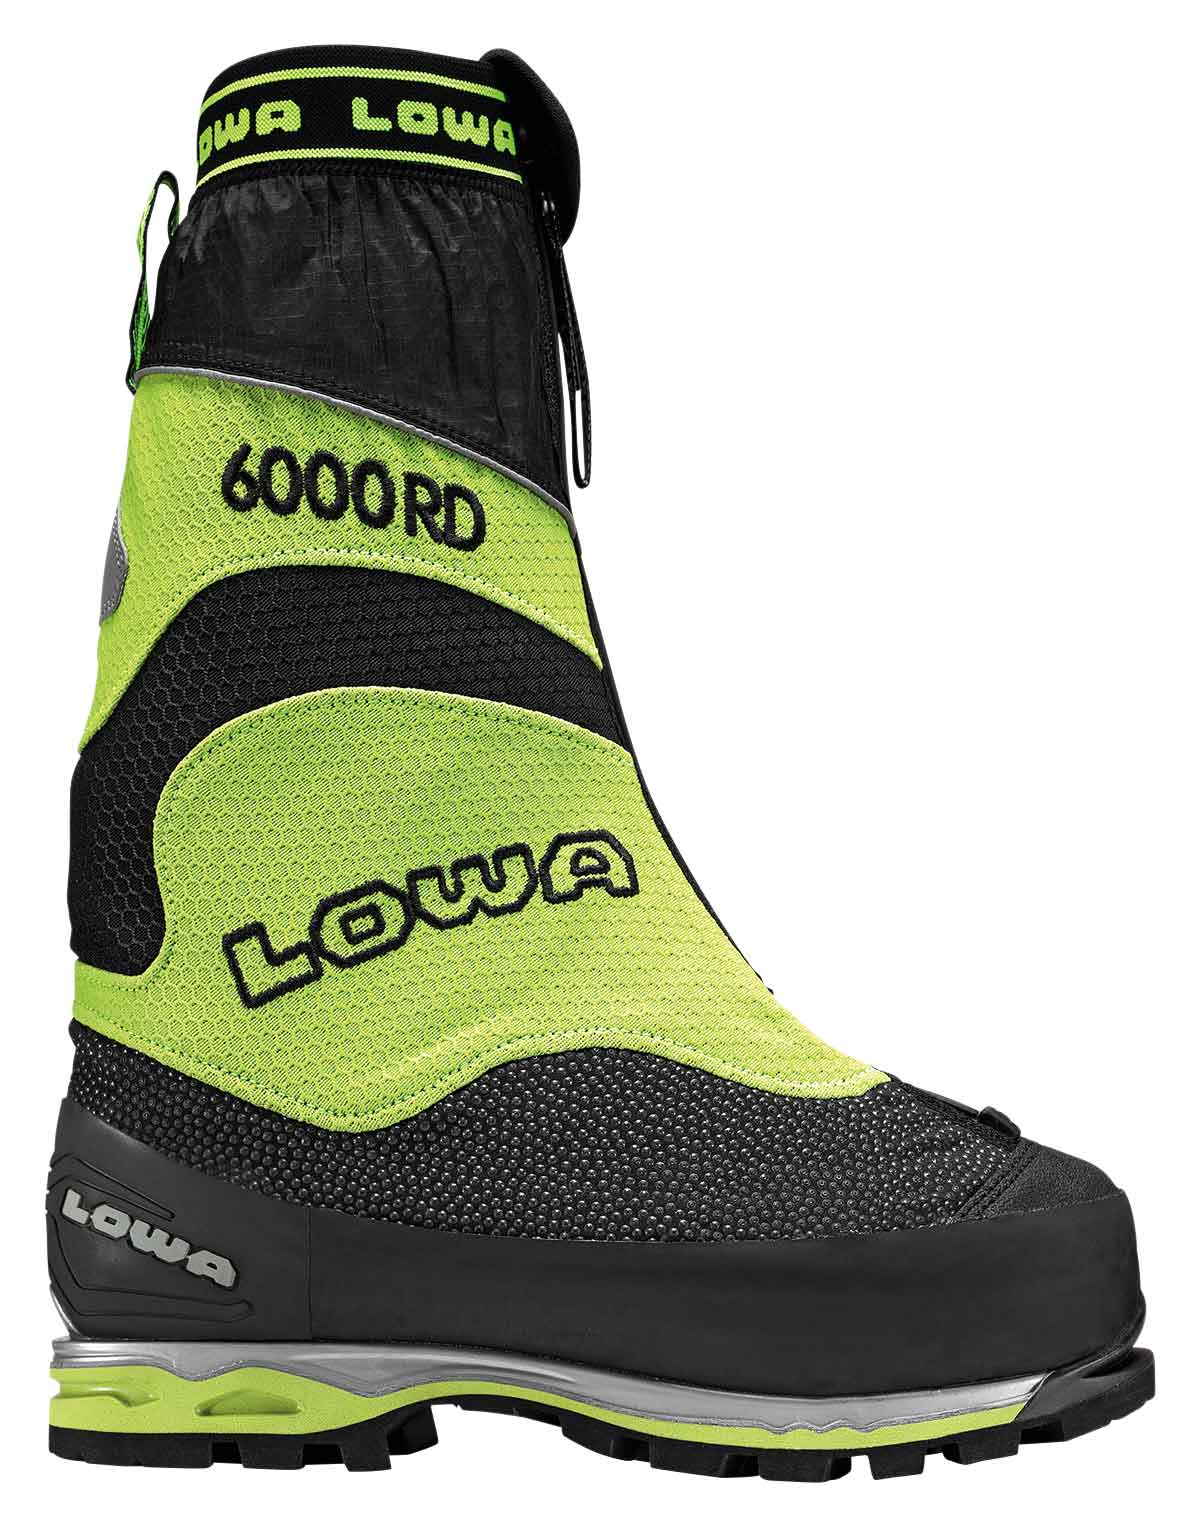 Lowa Expedition 6000 Evo RD - Chaussures alpinisme | Hardloop